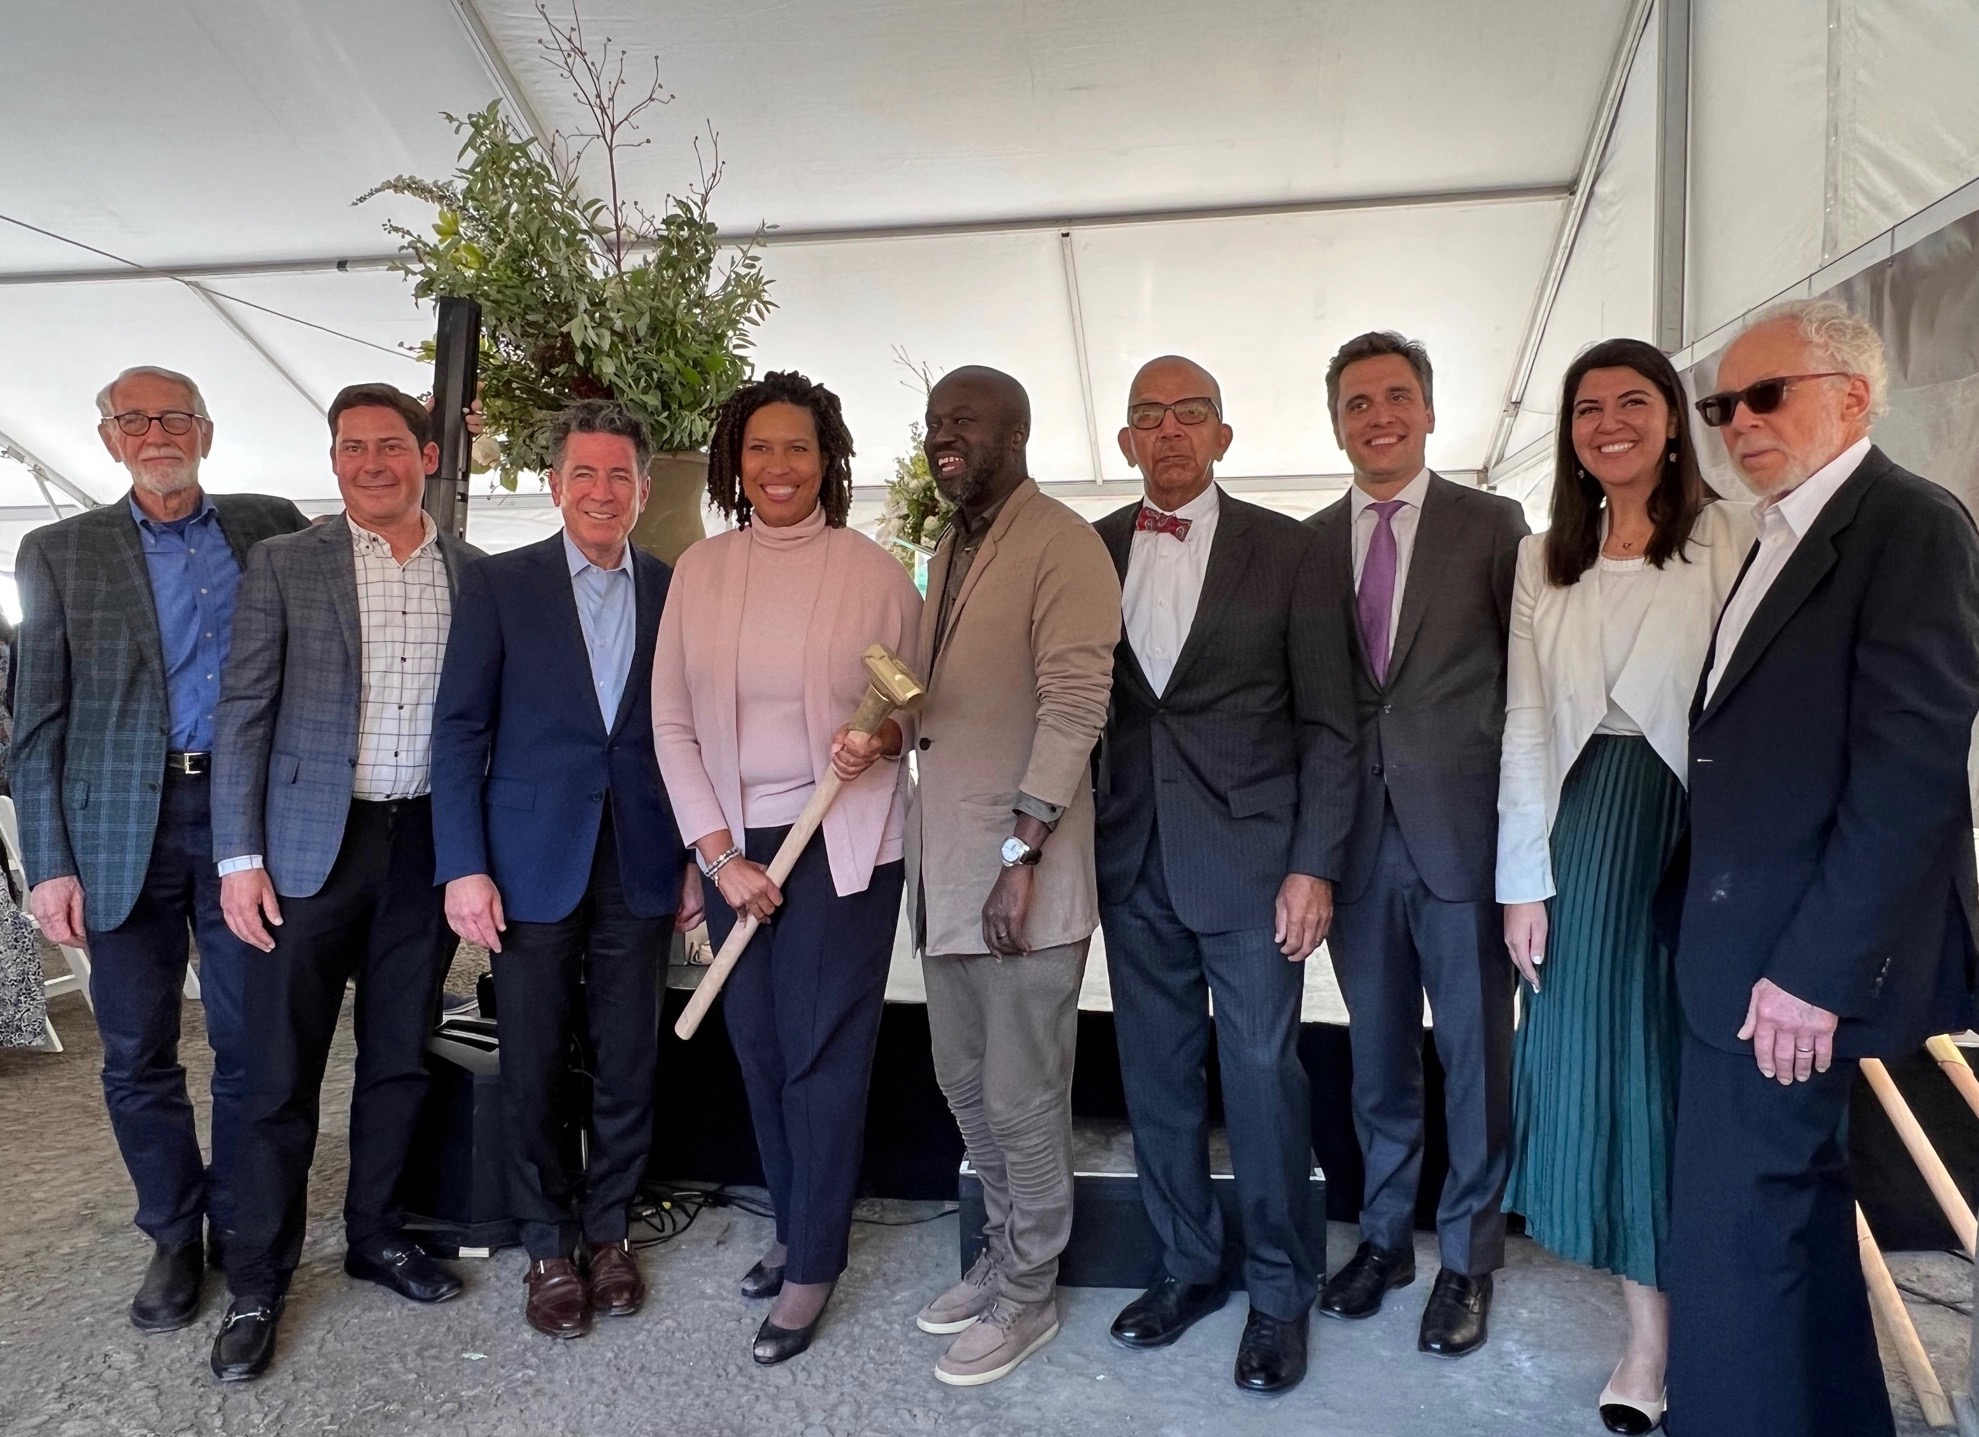 Laurie Olin, Muriel Bowser, Sir David Adjaye, Anthony Williams, Peter Armstrong, Brooke Pinto, Richard Levy